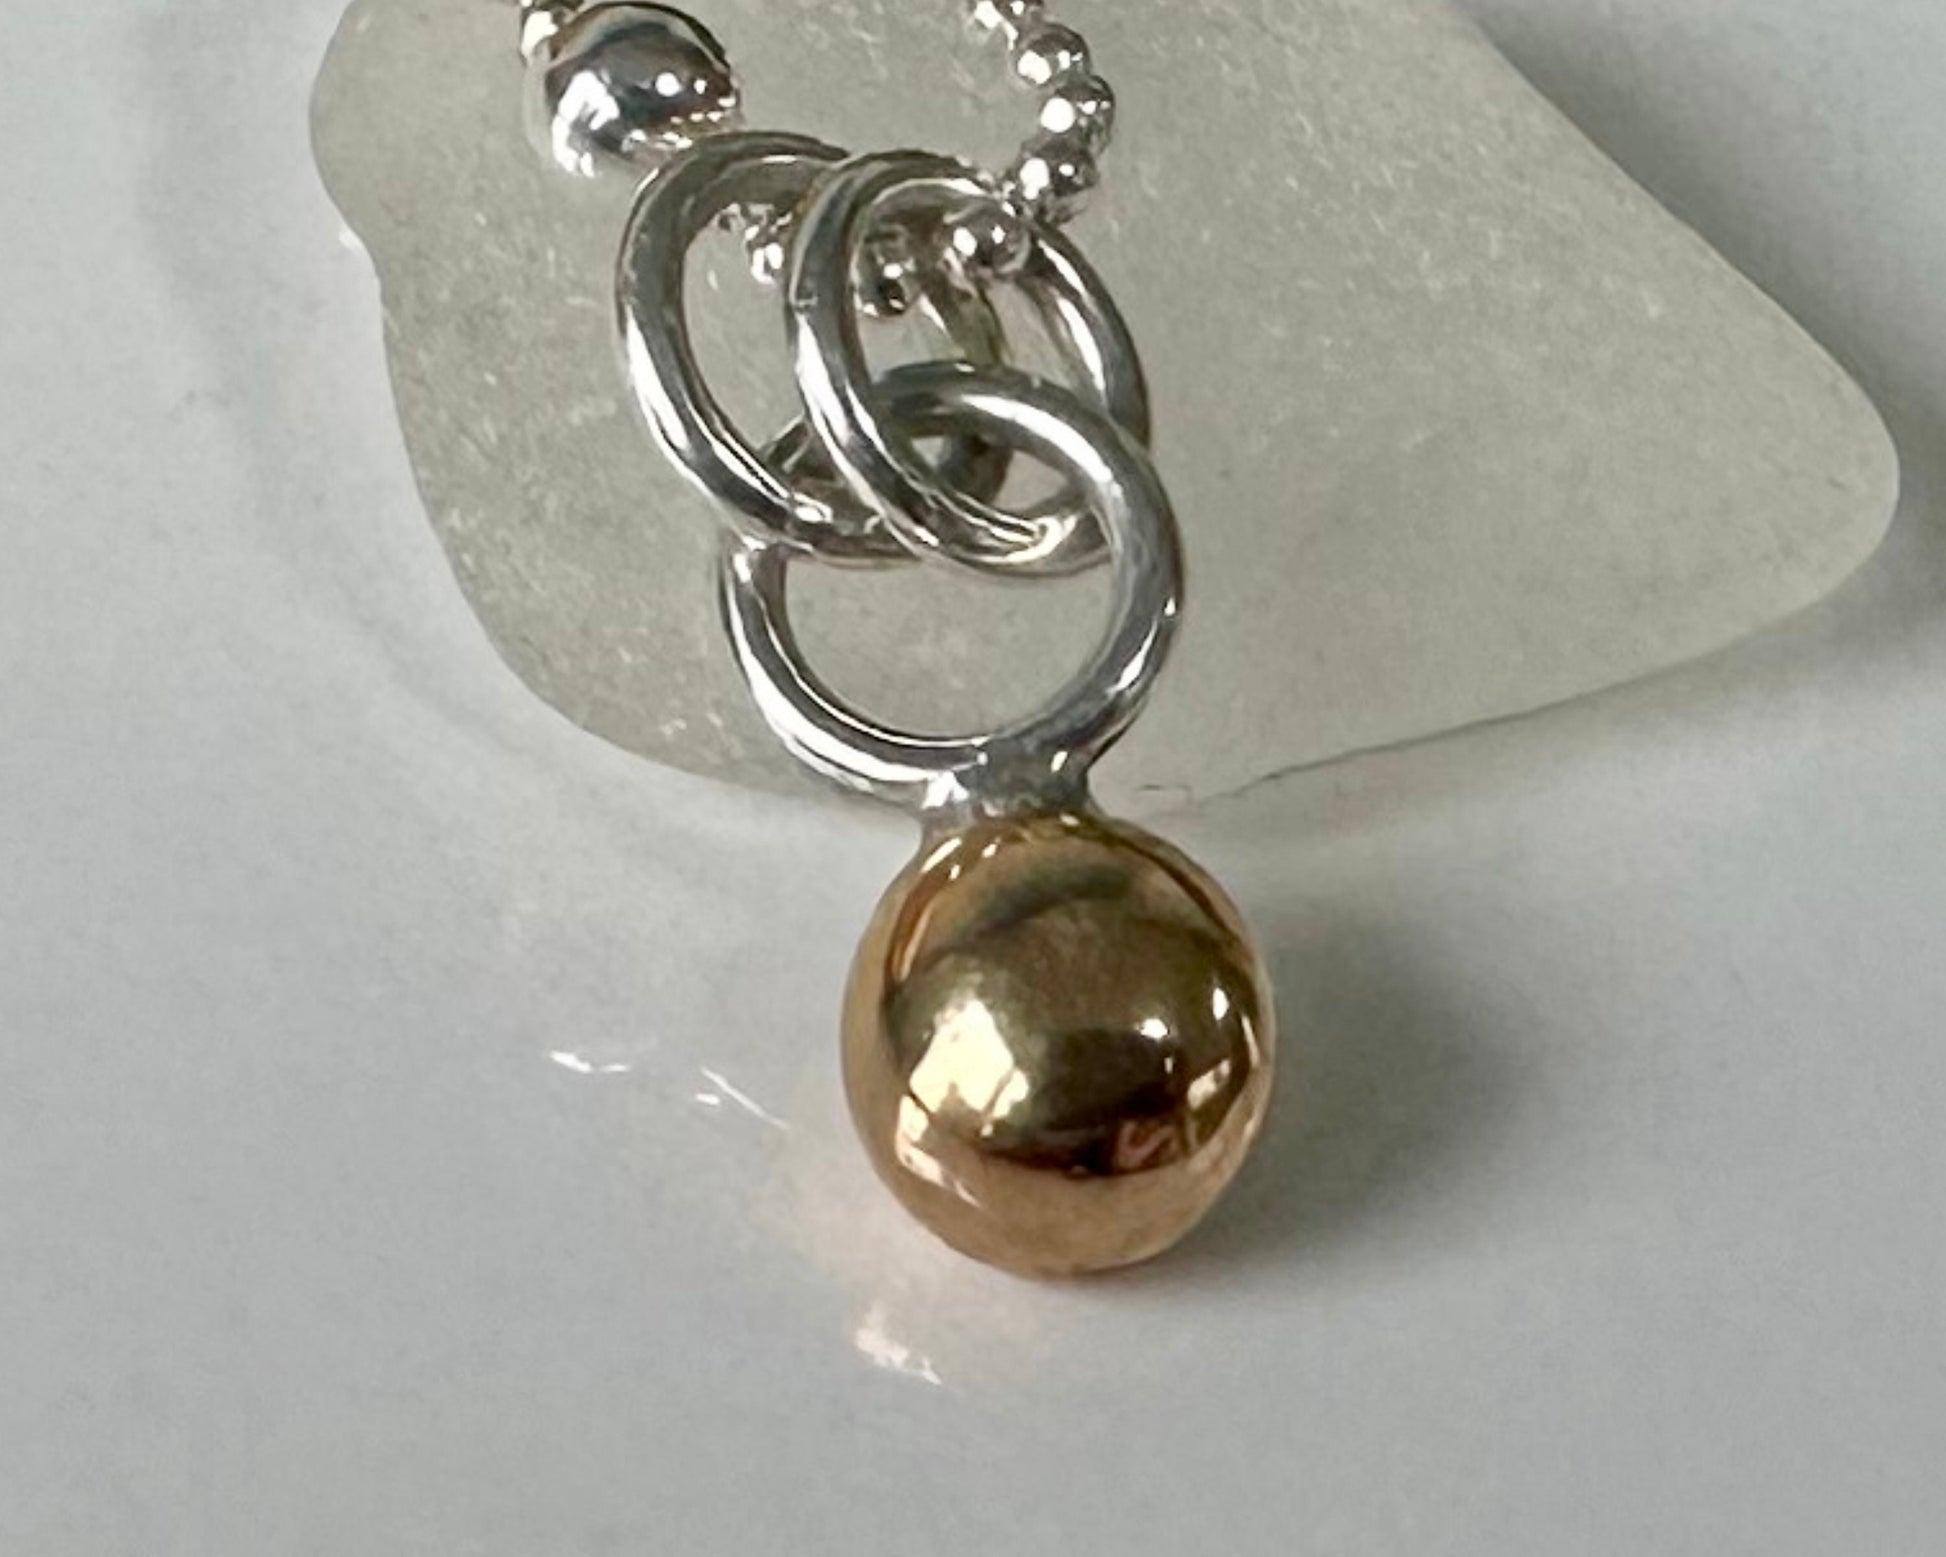 9ct Gold Nugget Pendant, Freeform Gold and Sterling Silver Necklace, Handmade Gold Ball Pendant, Solid Gold Blob, Bridesmaid Gift